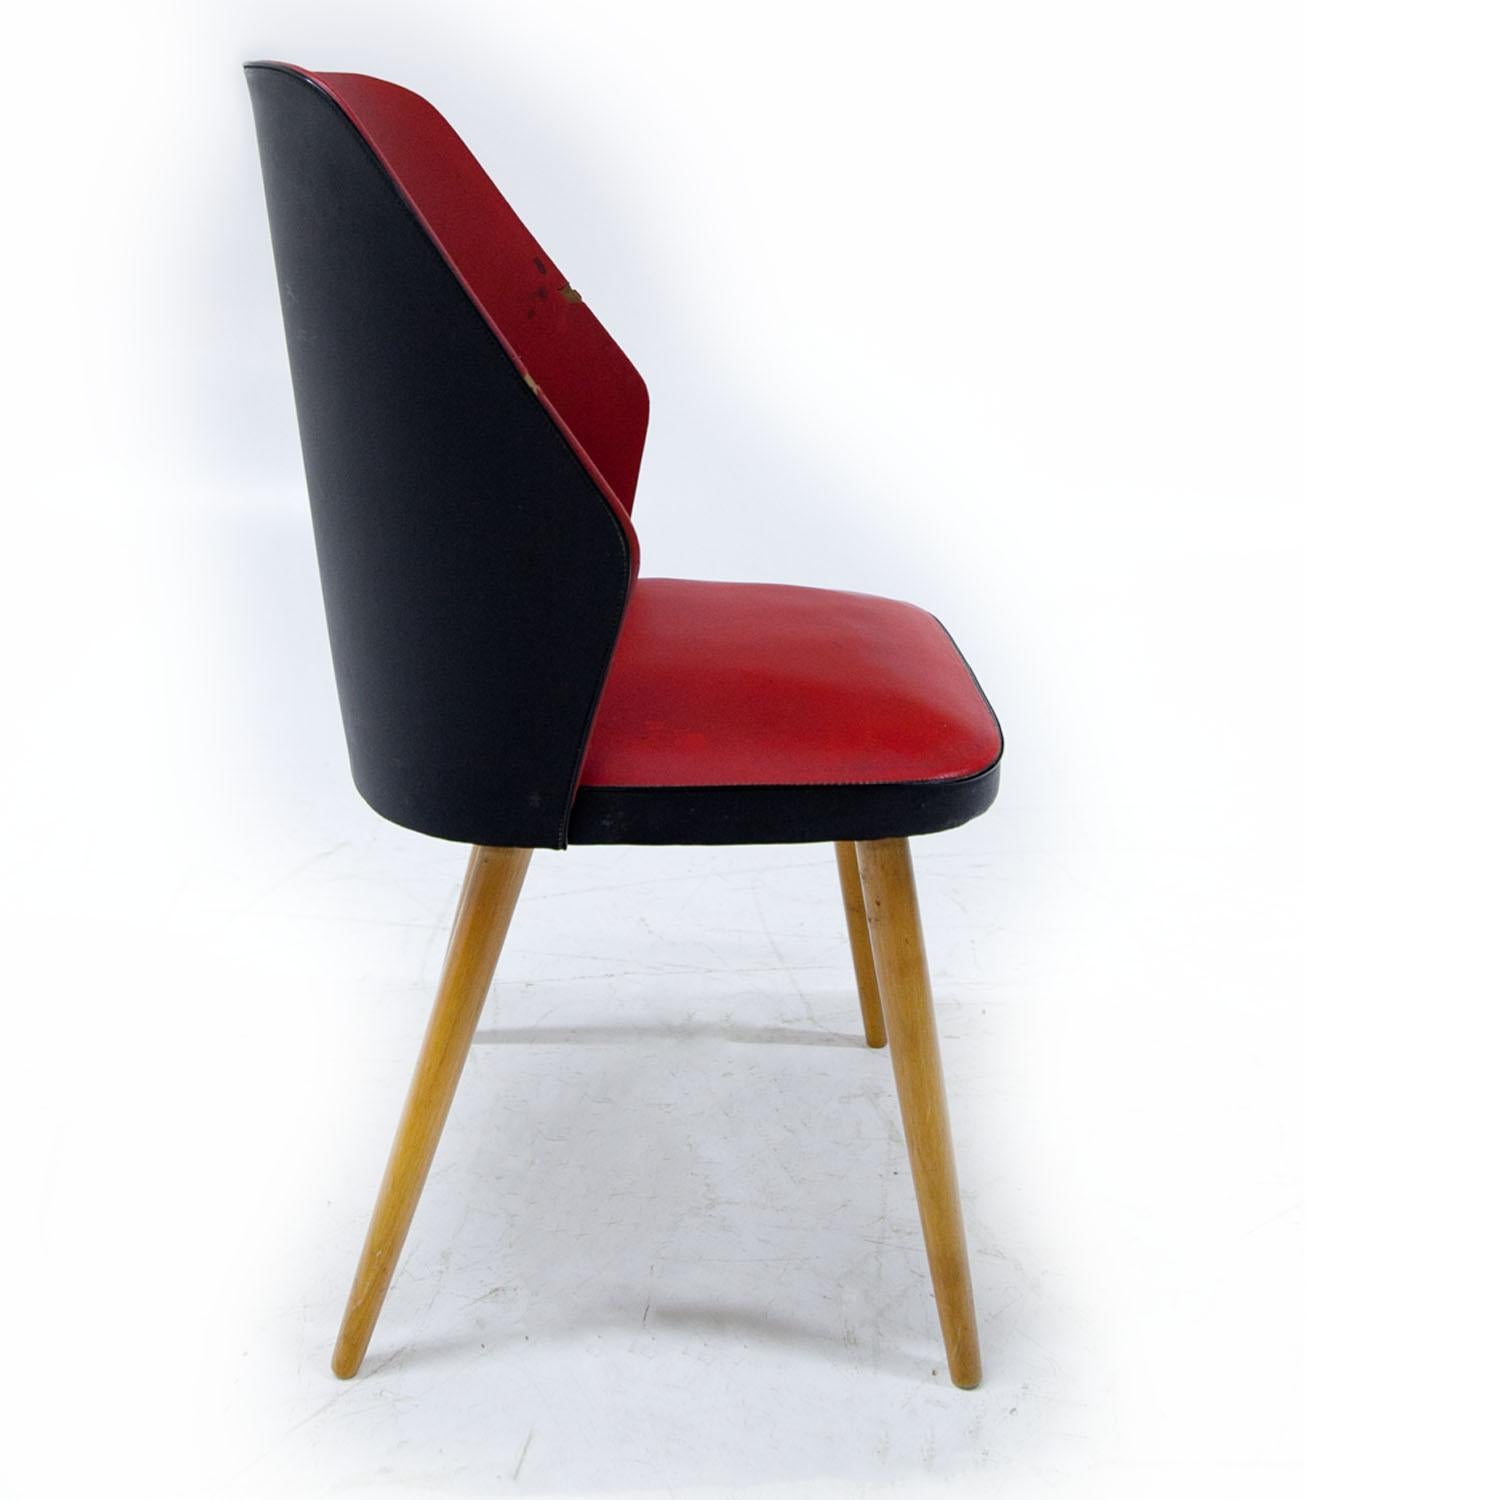 Midcentury club chair on conical wooden legs, upholstered with a black and red faux leather. Signs of age and use.